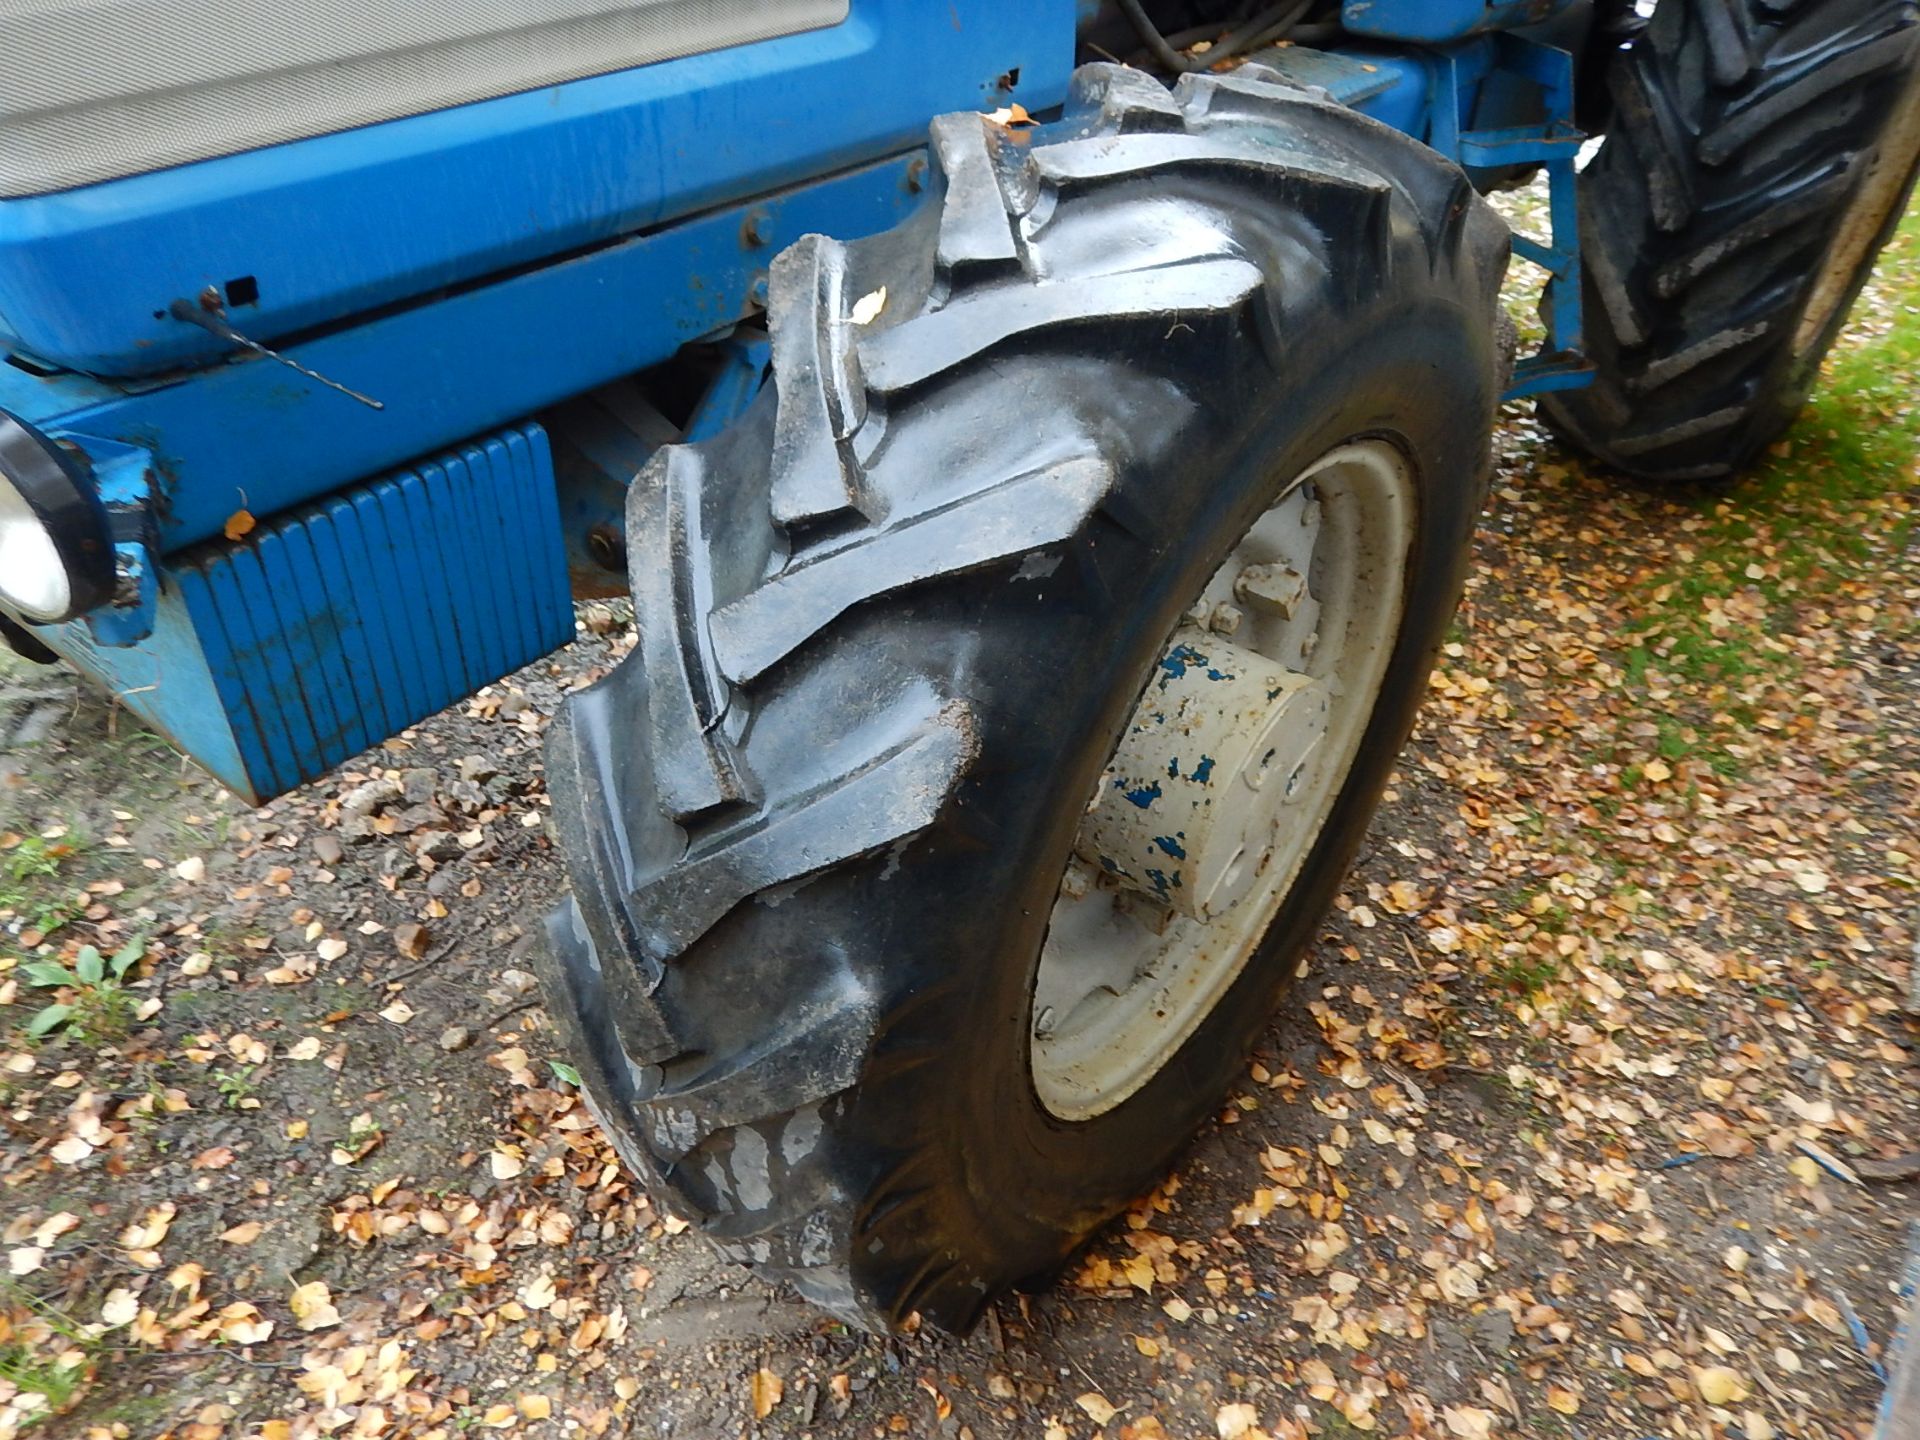 1985 FORD TW-25 4wd TRACTOR Fitted with front underslung weight, rear inside wheel weights, Q cab - Image 11 of 12